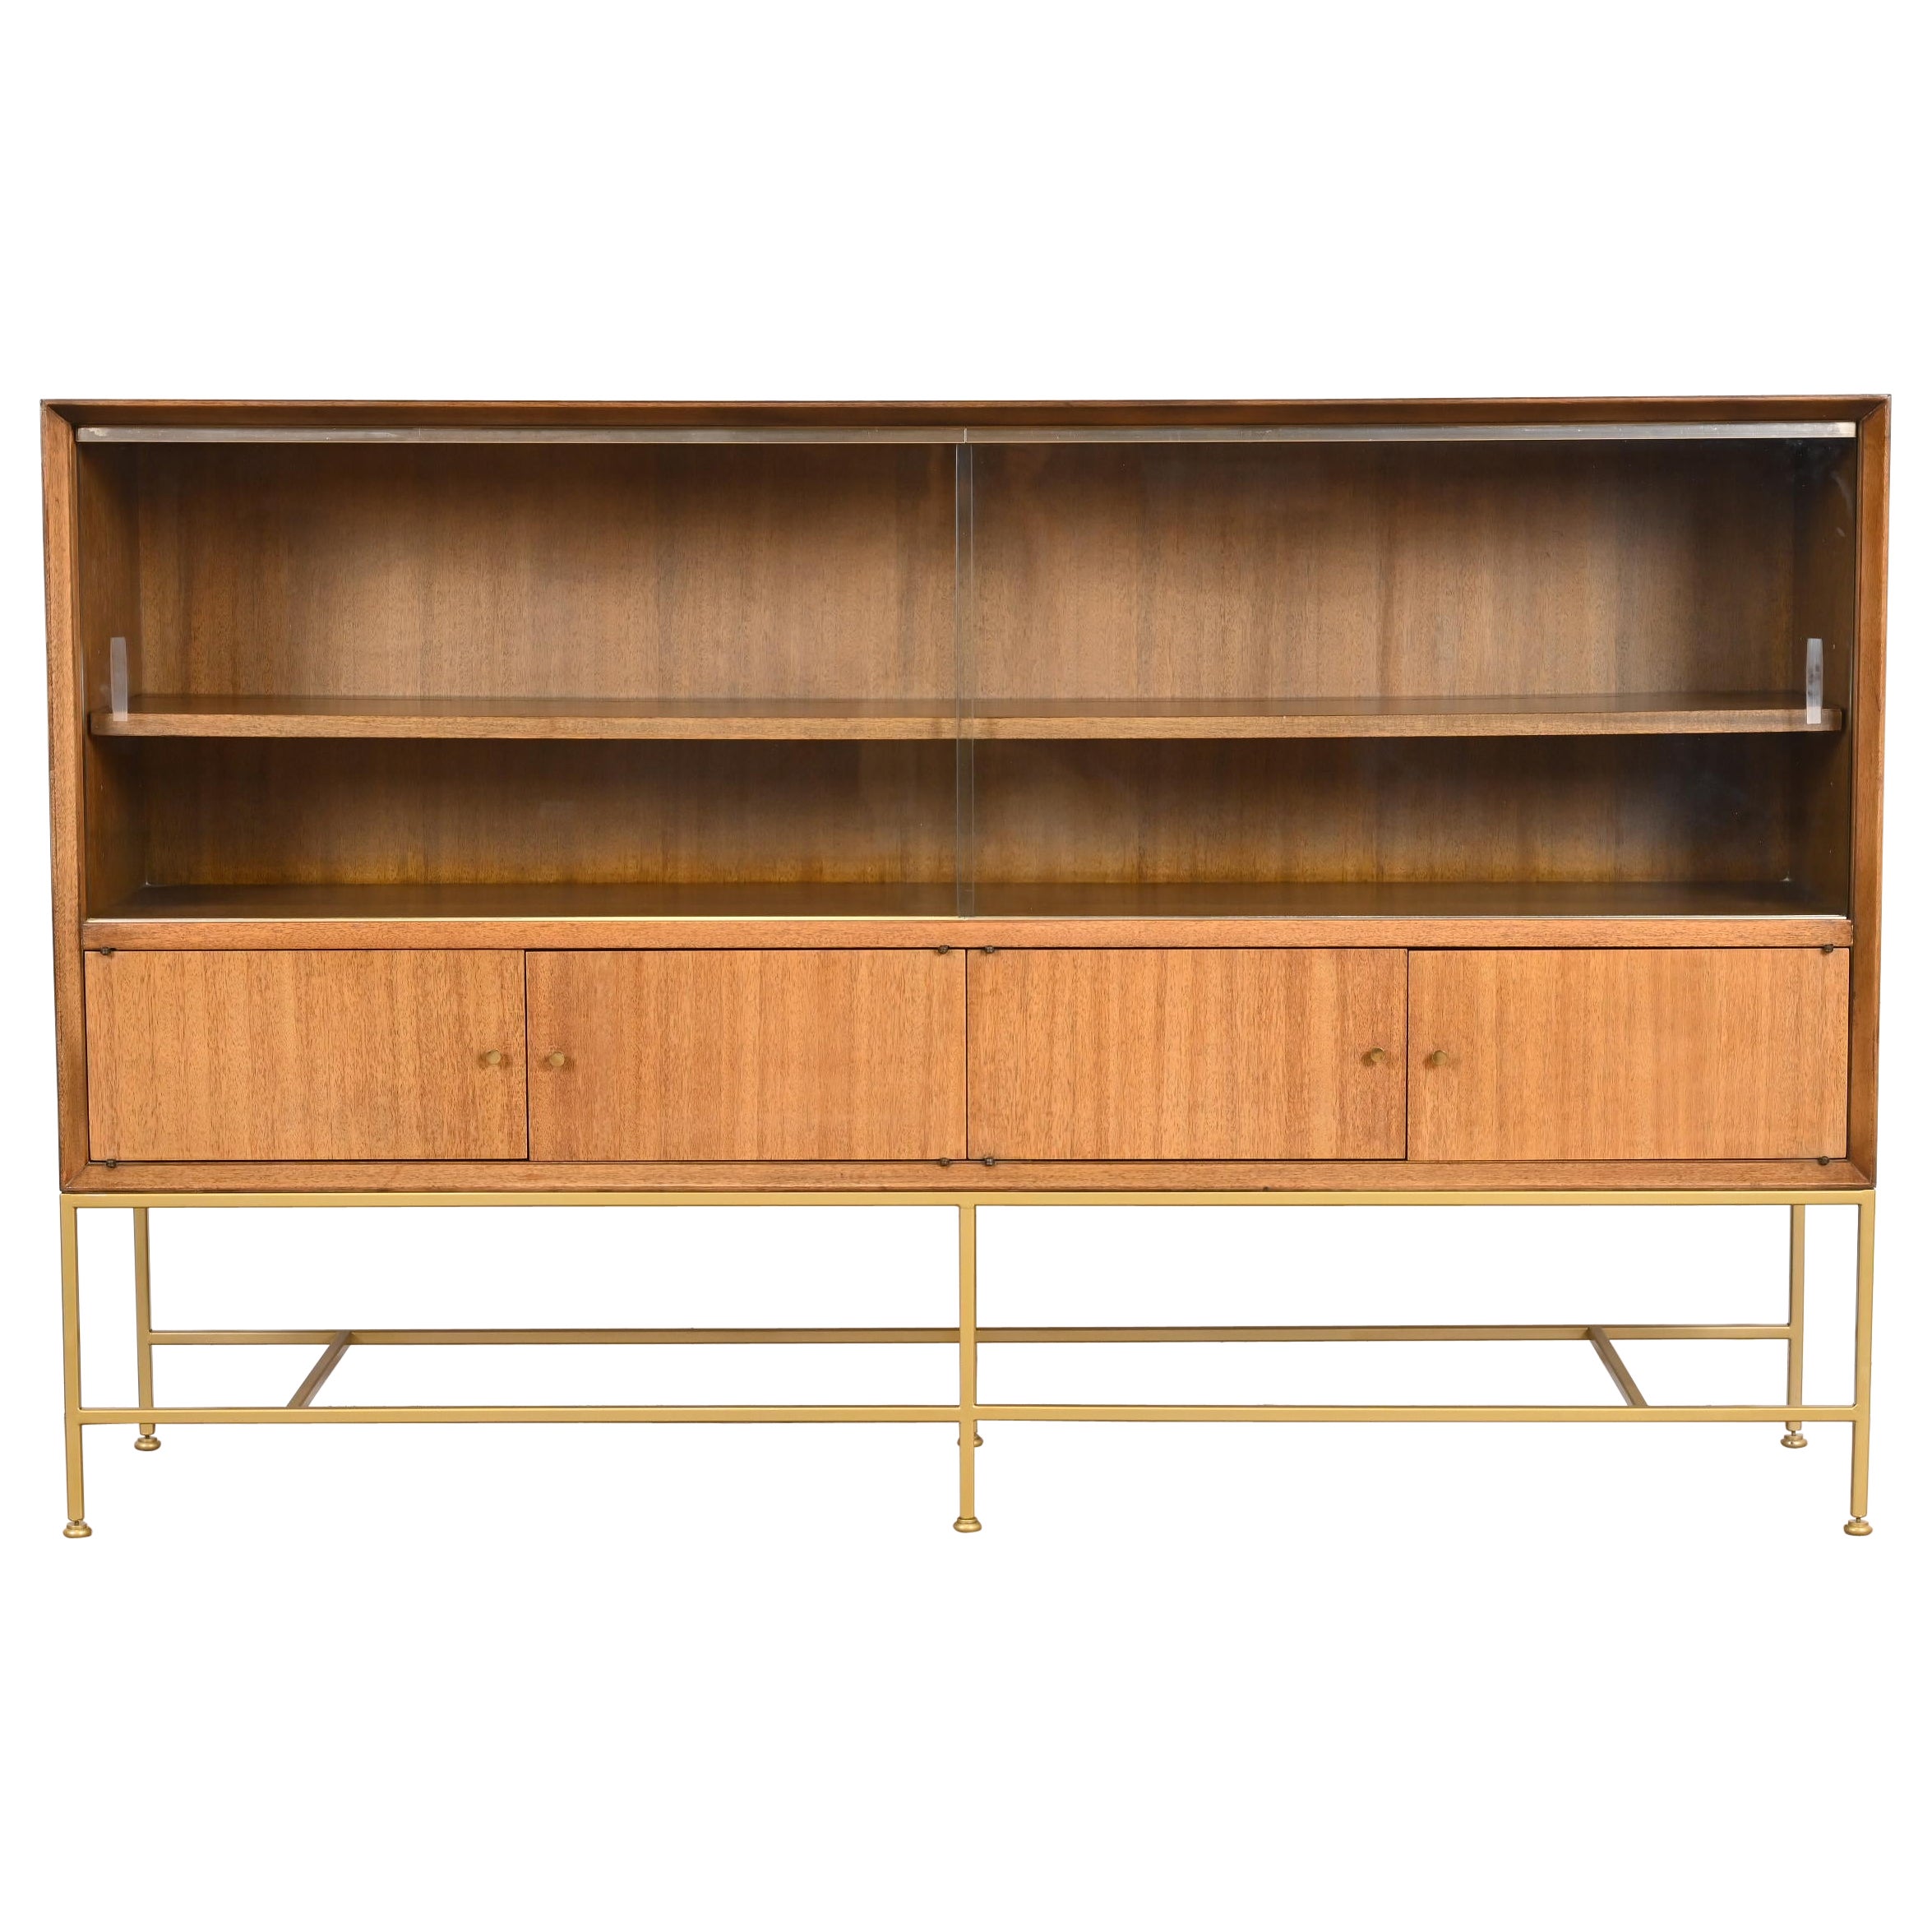 Paul McCobb Irwin Collection Mahogany and Brass Bookcase or Bar Cabinet, 1950s